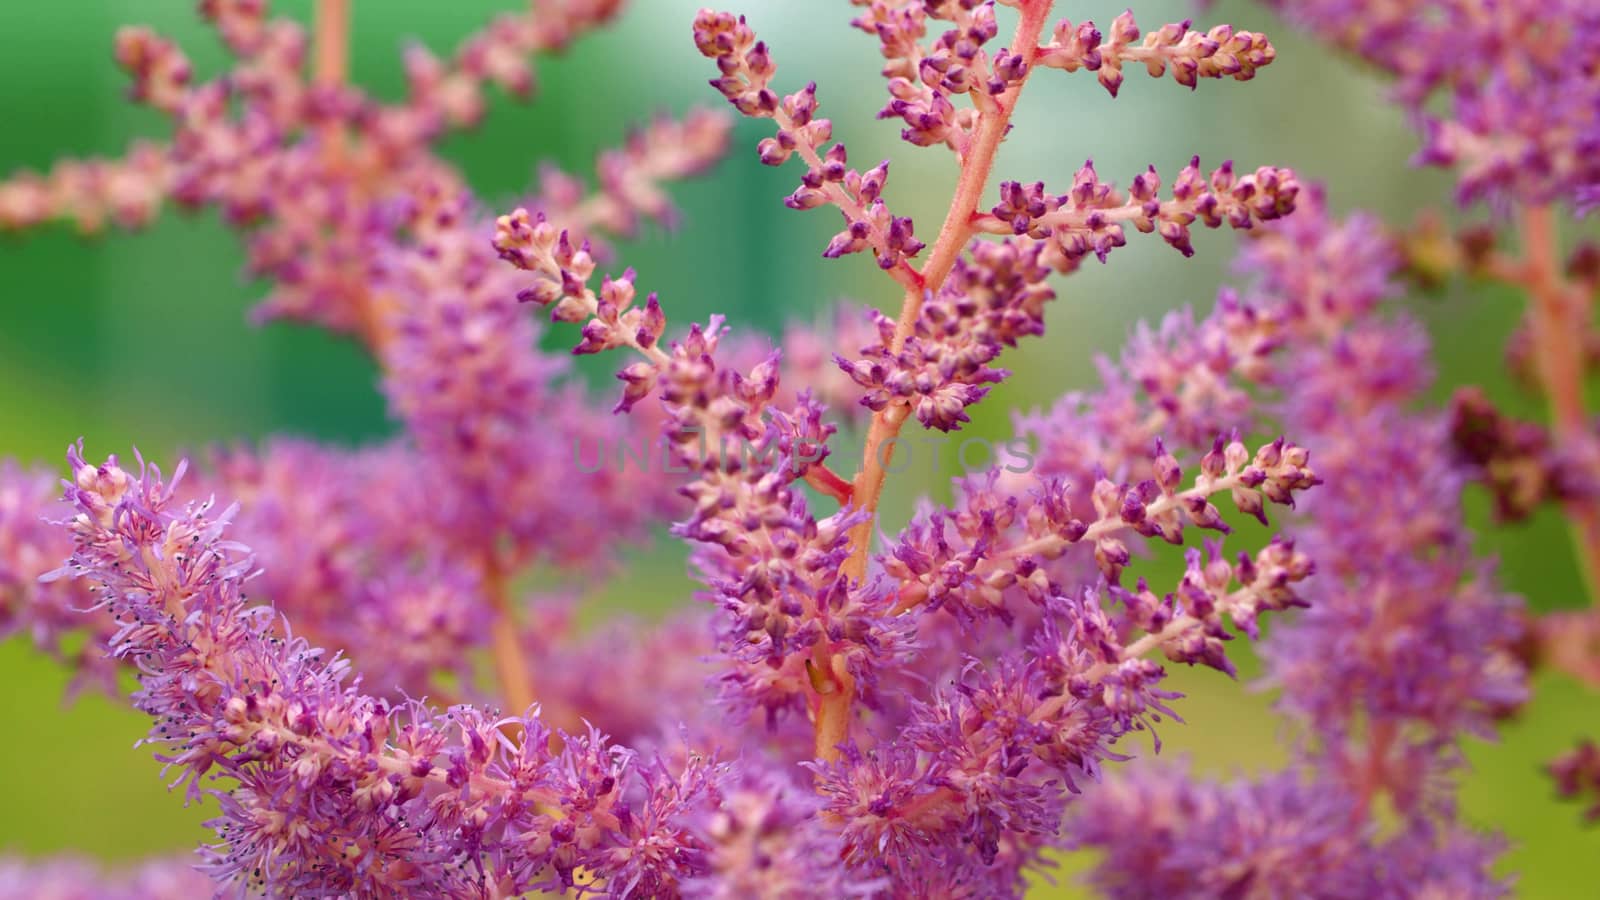 Close up of the beautiful pink inflorescences in the garden in summer. Macro shooting. Seasonal scene. Natural background